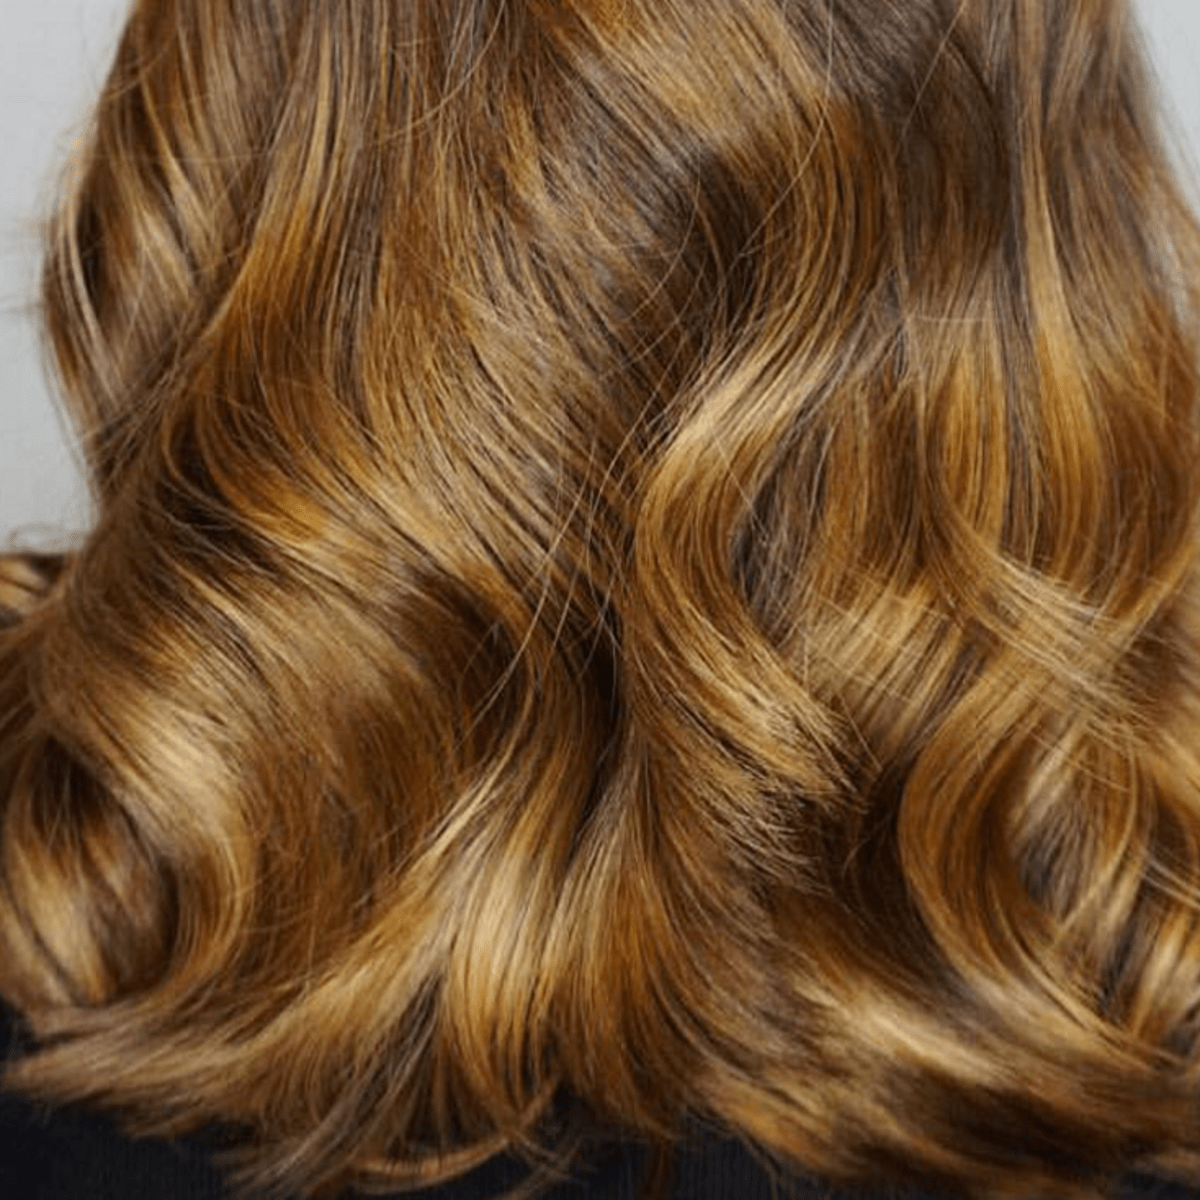 5 of the Best Hair-Dyeing Trends for Natural-Looking Highlights - Verily